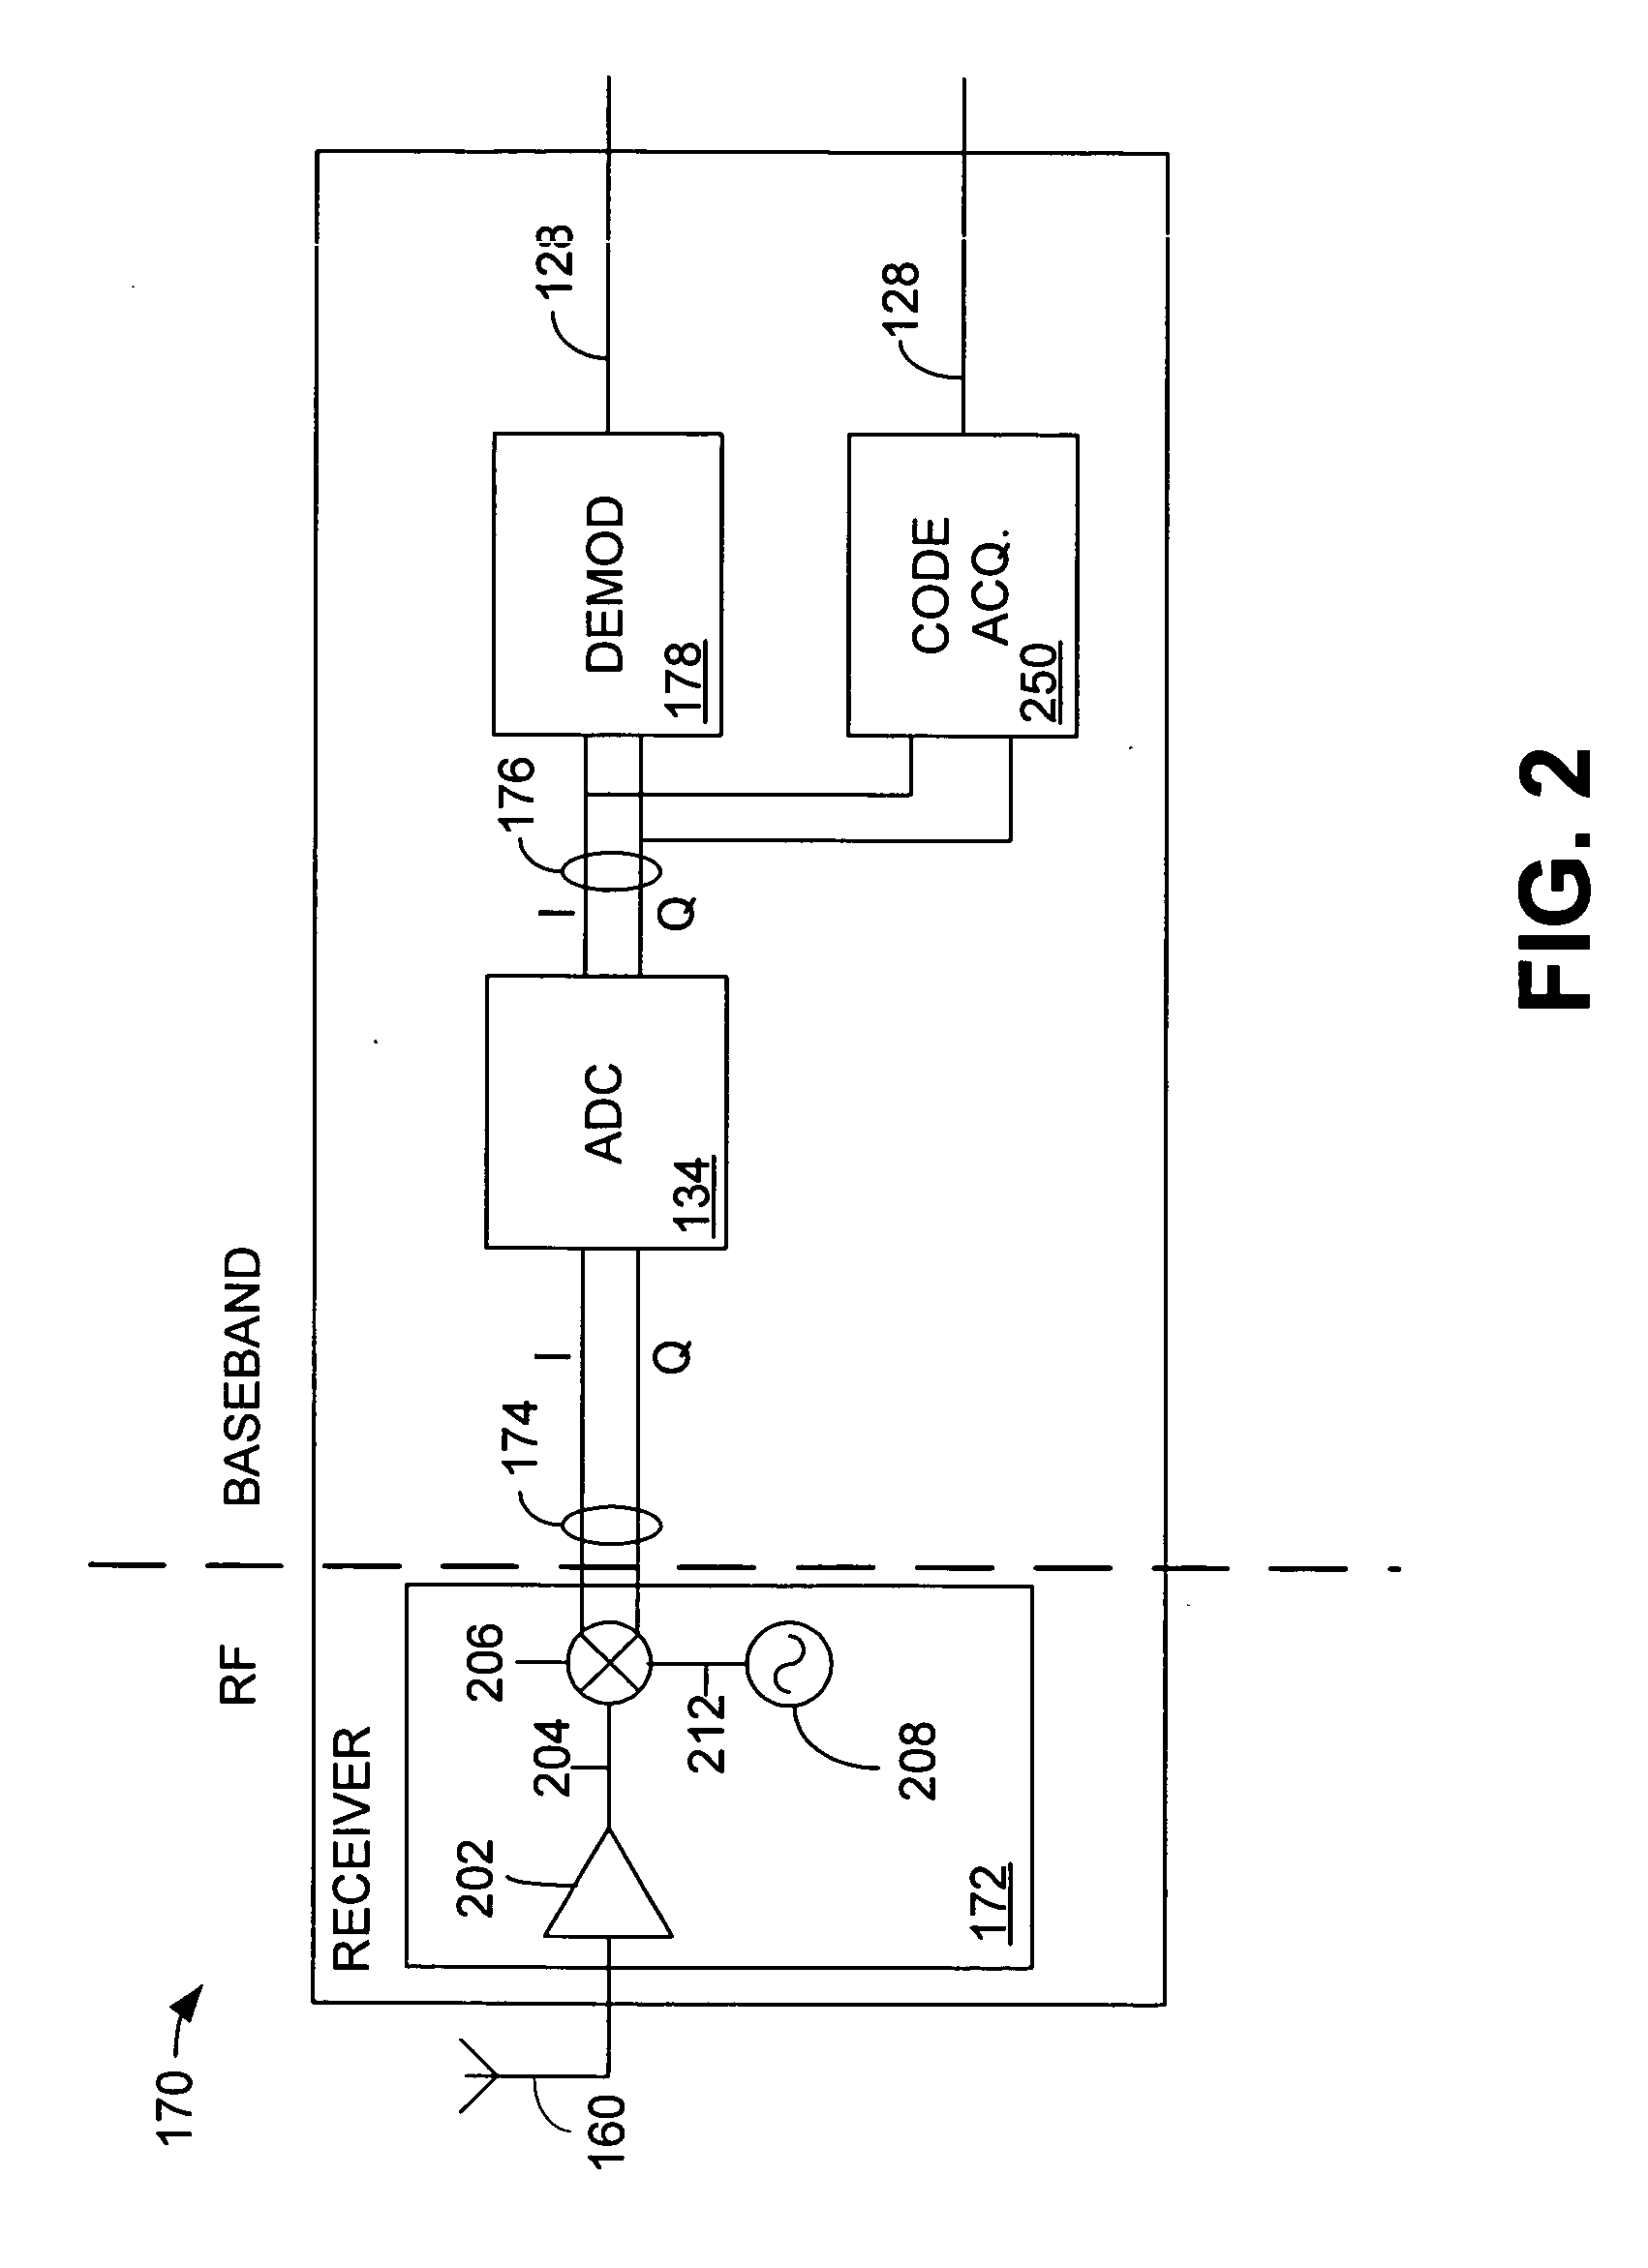 Multiple simultaneous frequency and code acquisition for a code division multiple access (CDMA) communication system